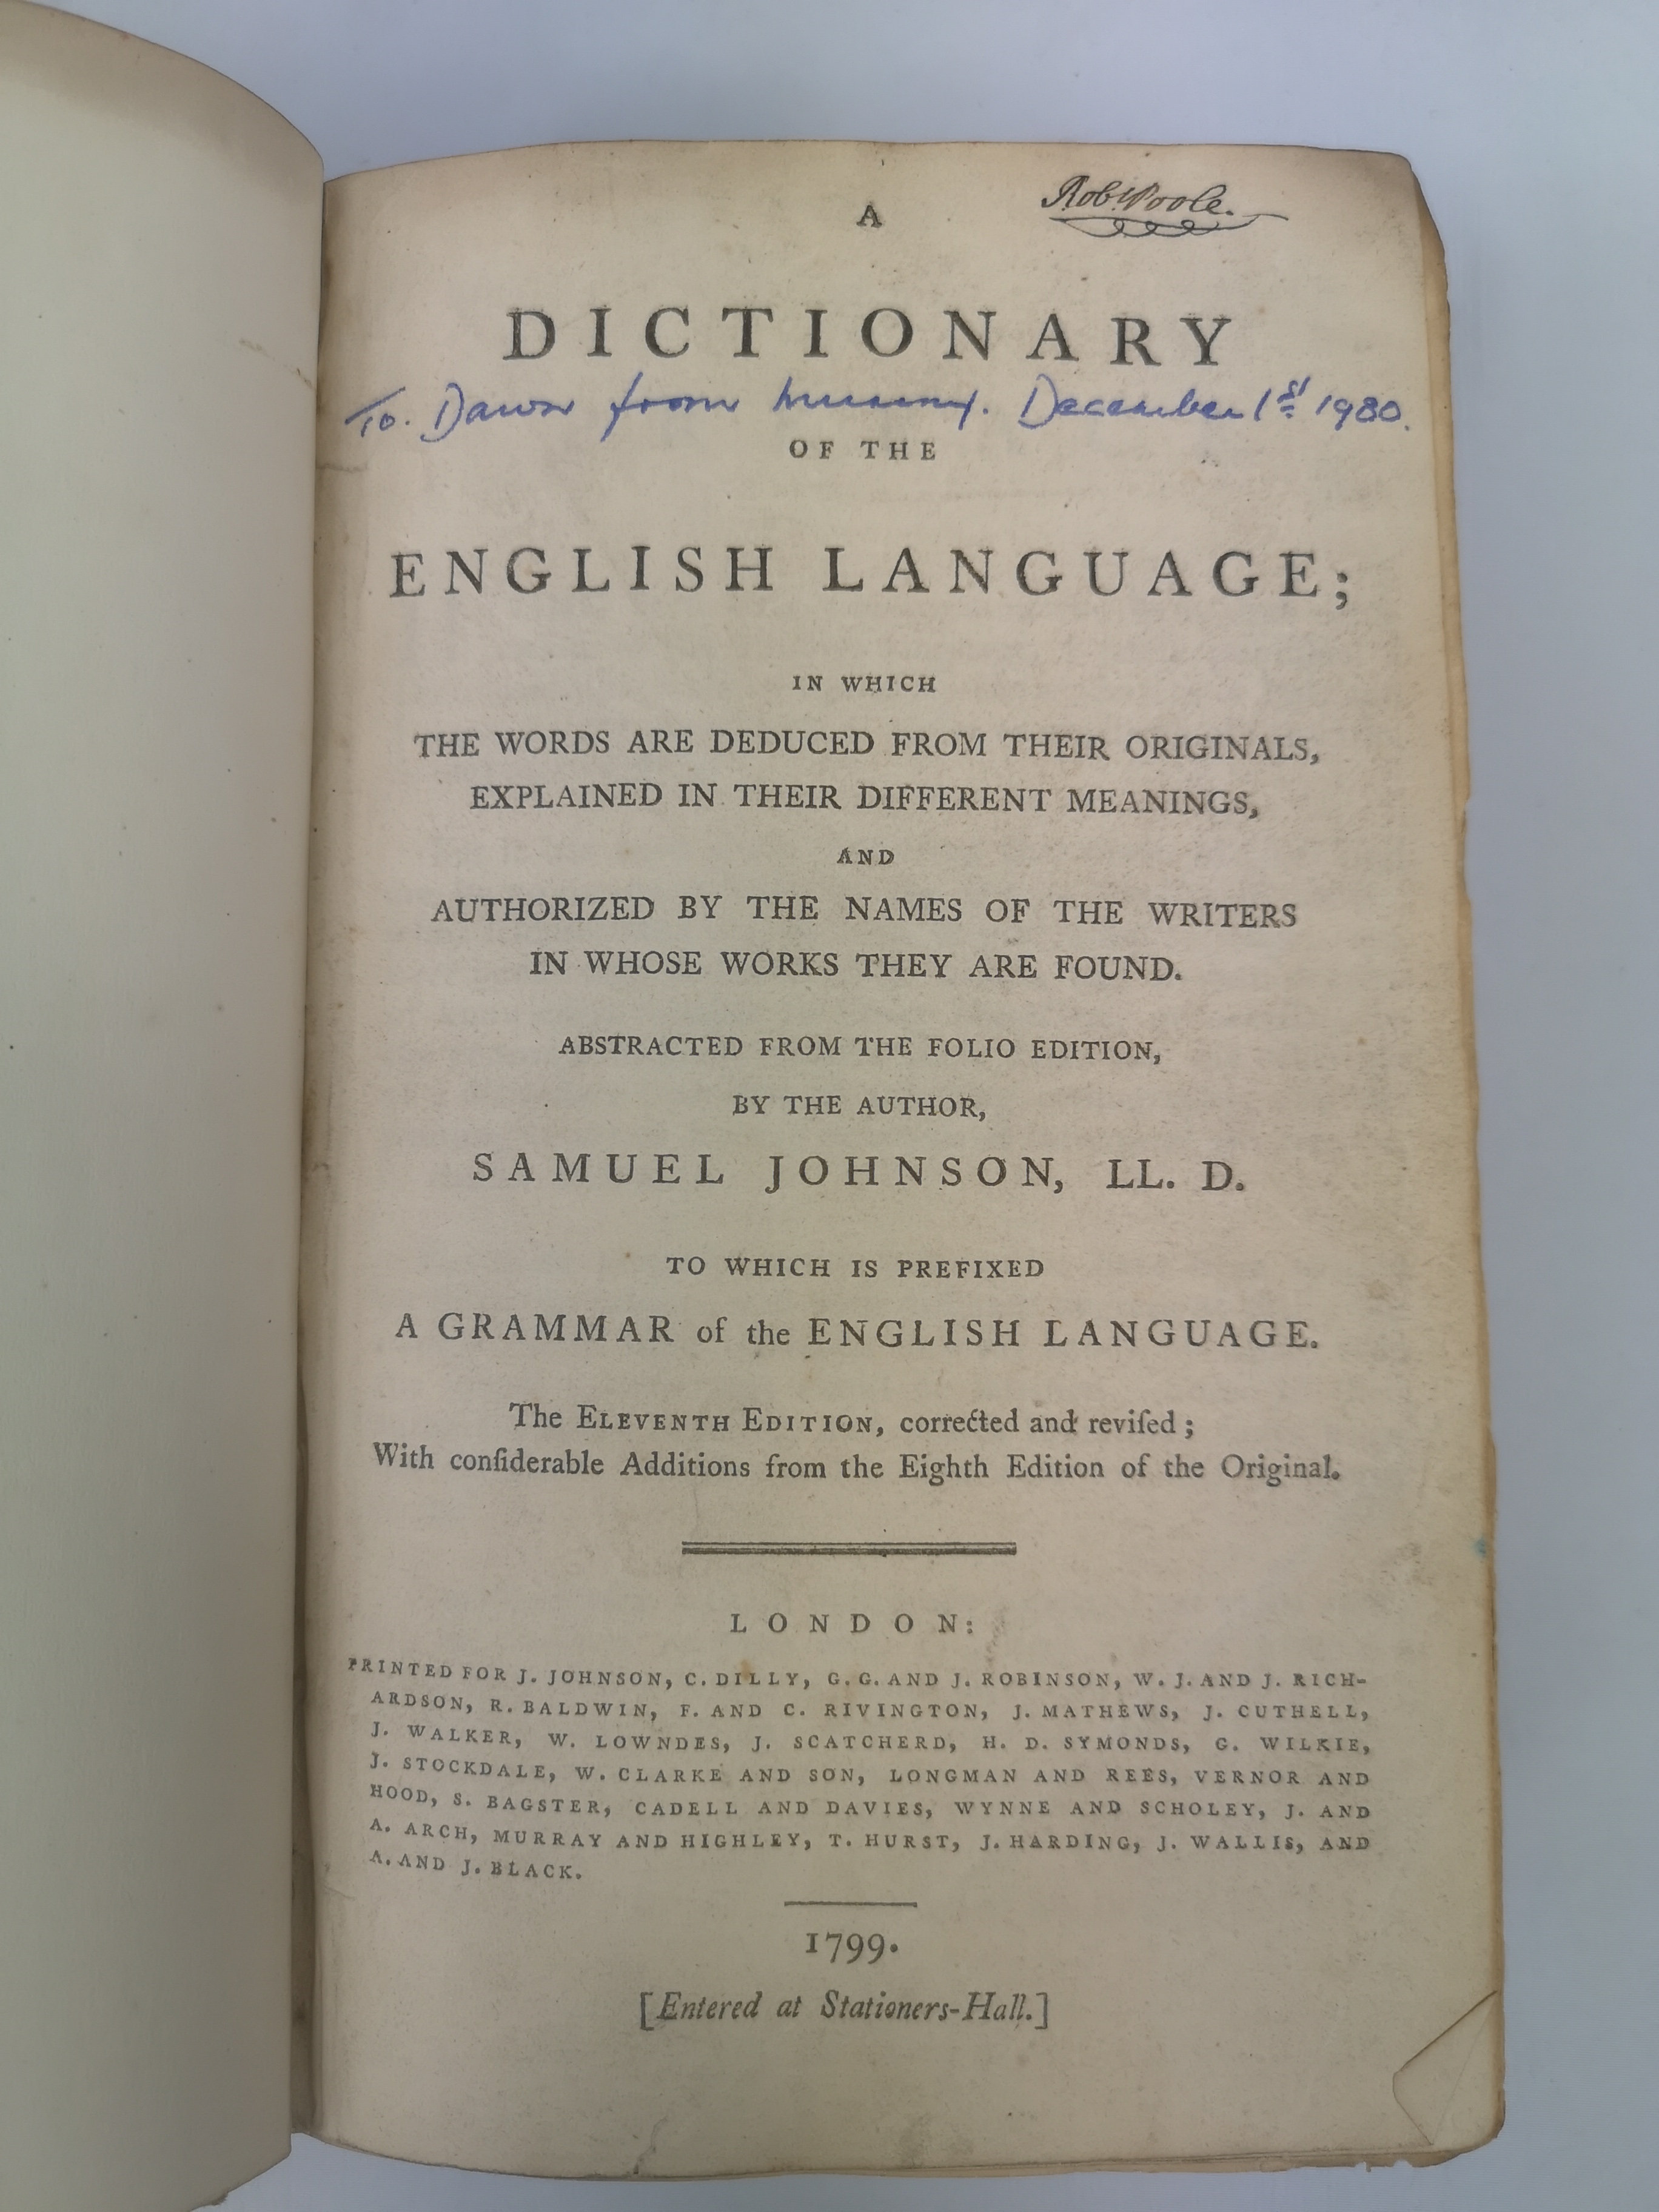 A Dictionary of the English Language by Samuel Johnson - Image 2 of 2